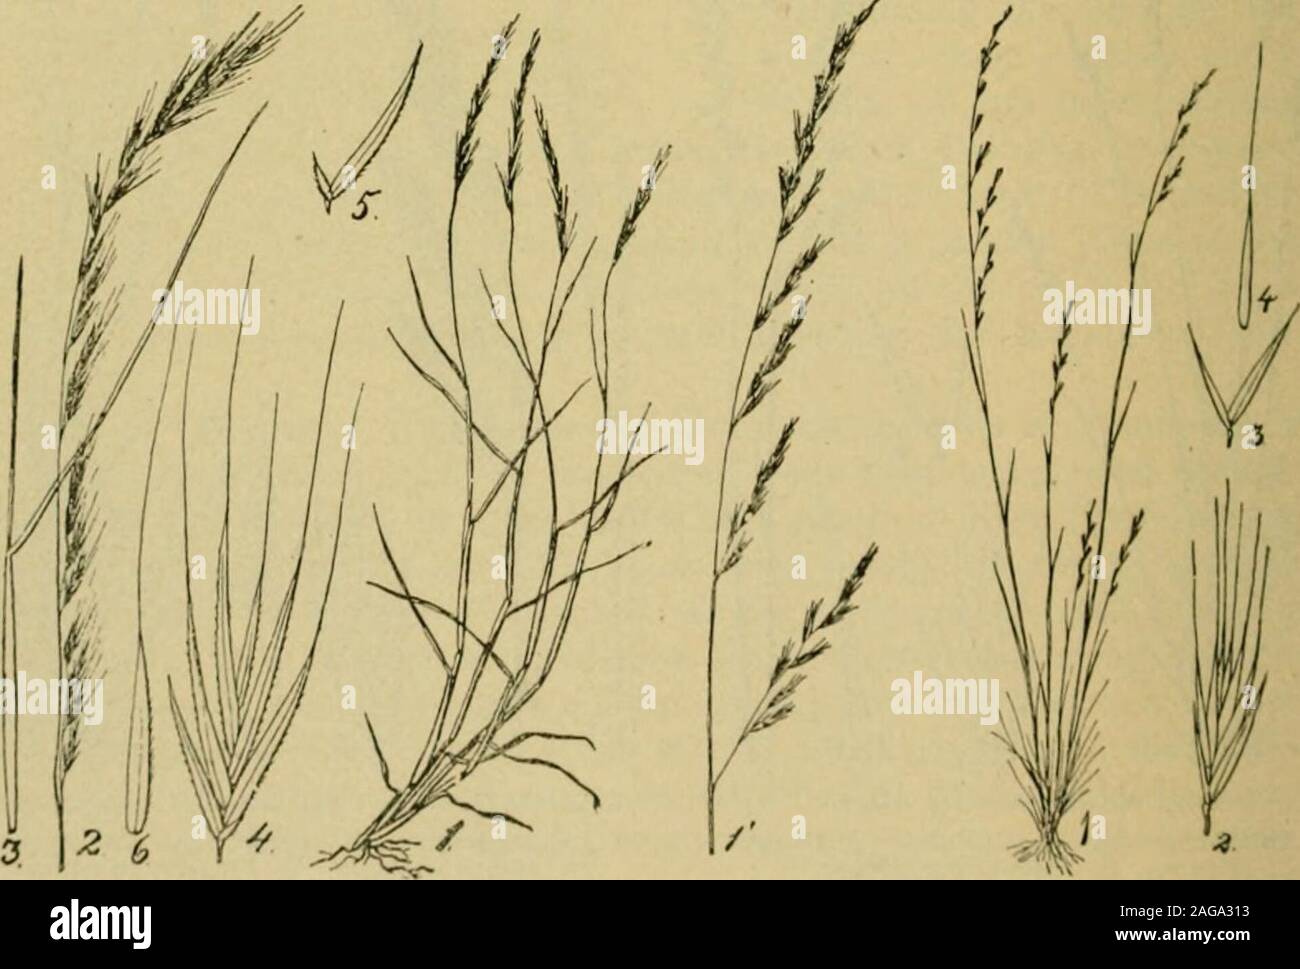 . Grasses and forage plants, by J.B. Killebrew. walks if set with it. Sheep are very fond of it andhence its name. Its panicles are narrow; its leaves are short, bristle-like and tuftedand have a grayish color tinged with red. It forms a profuse foliage inbunches and makes excellent pastures for sheep and cattle where othergrasses will not grow. This grass constitutes the great bulk of the grazing grasses in thesheep pastures of the Highlands of Scotland. It is believed by the shep-herds in that region to be more nutritious for sheep than any other. Inthe arid plains of Asia it is often the on Stock Photo